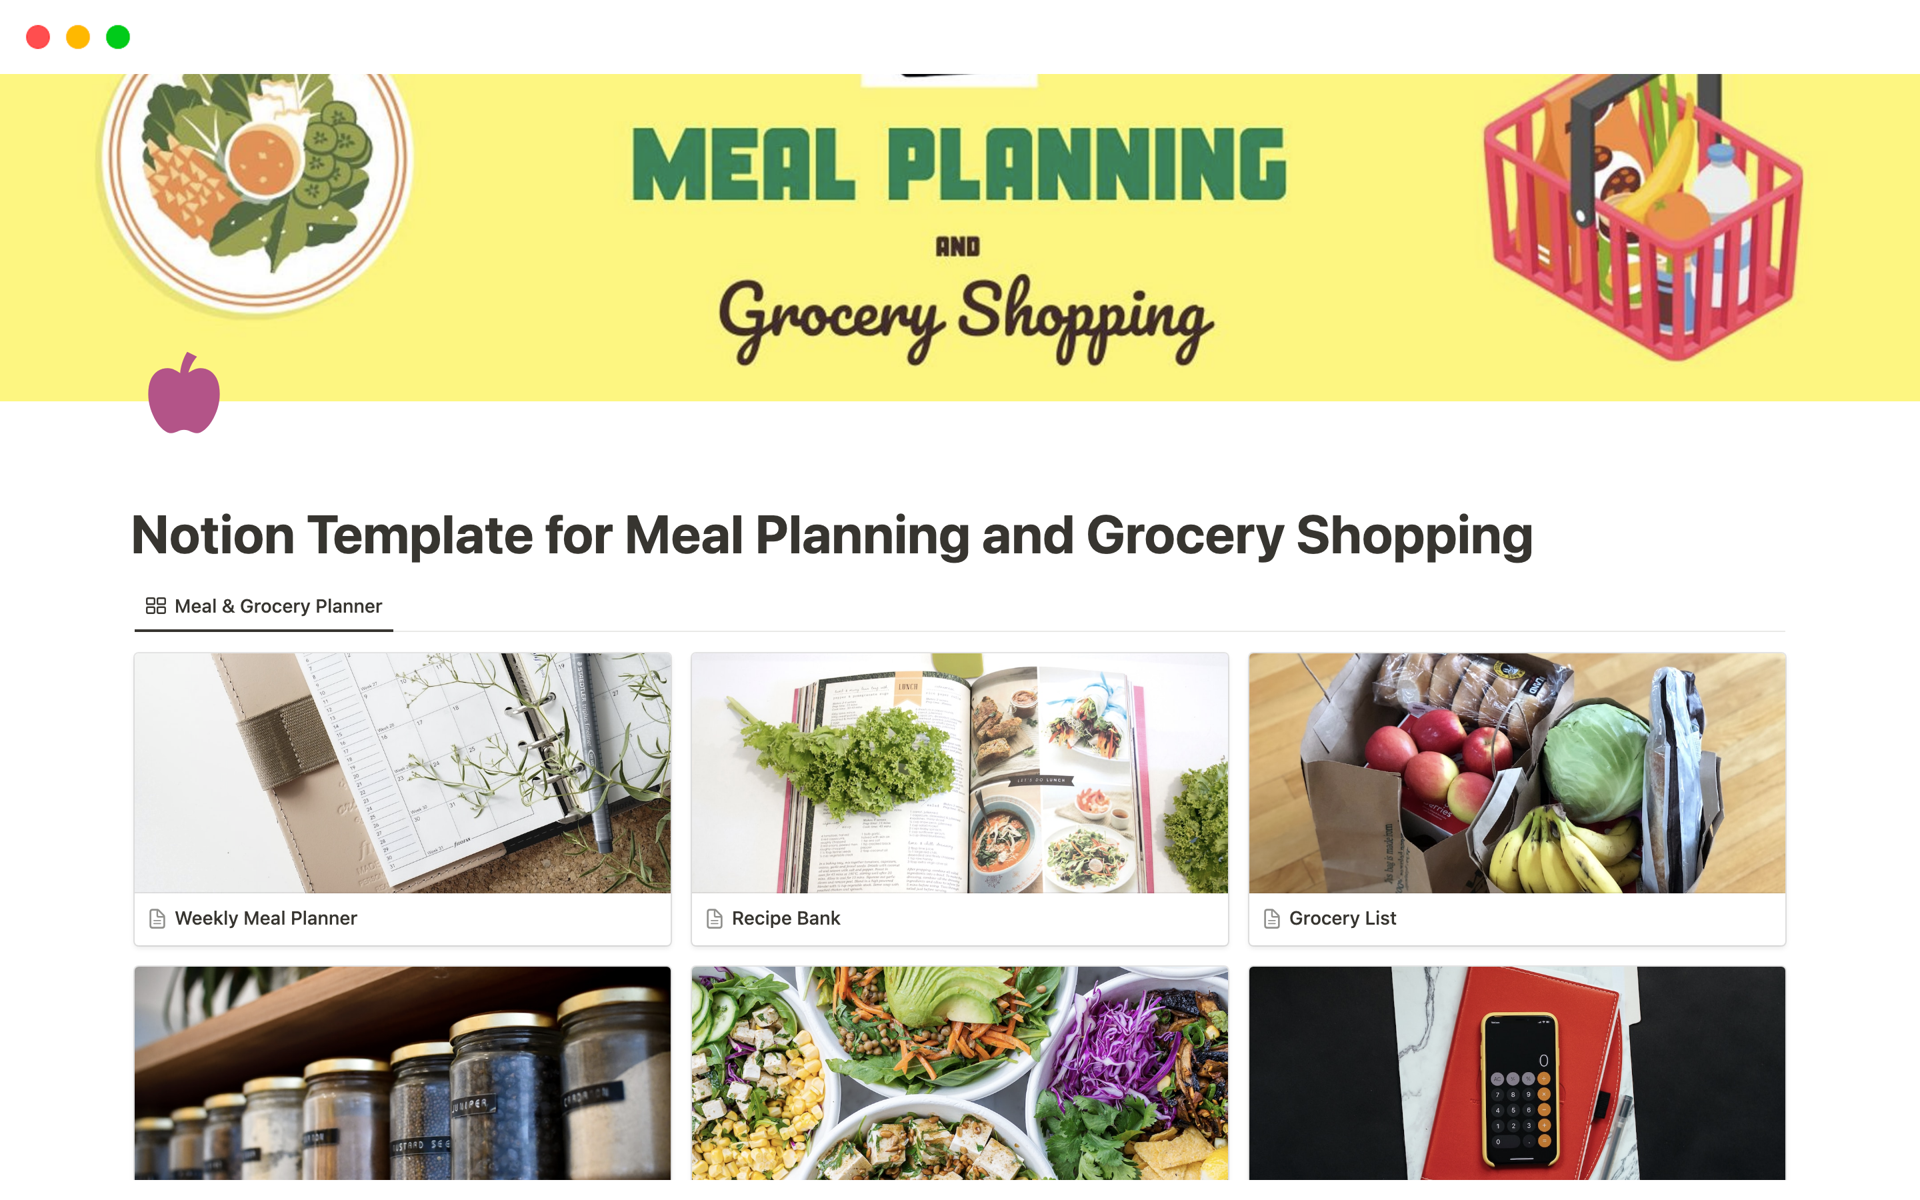 Take control of your meal planning and grocery shopping with our comprehensive Notion template.